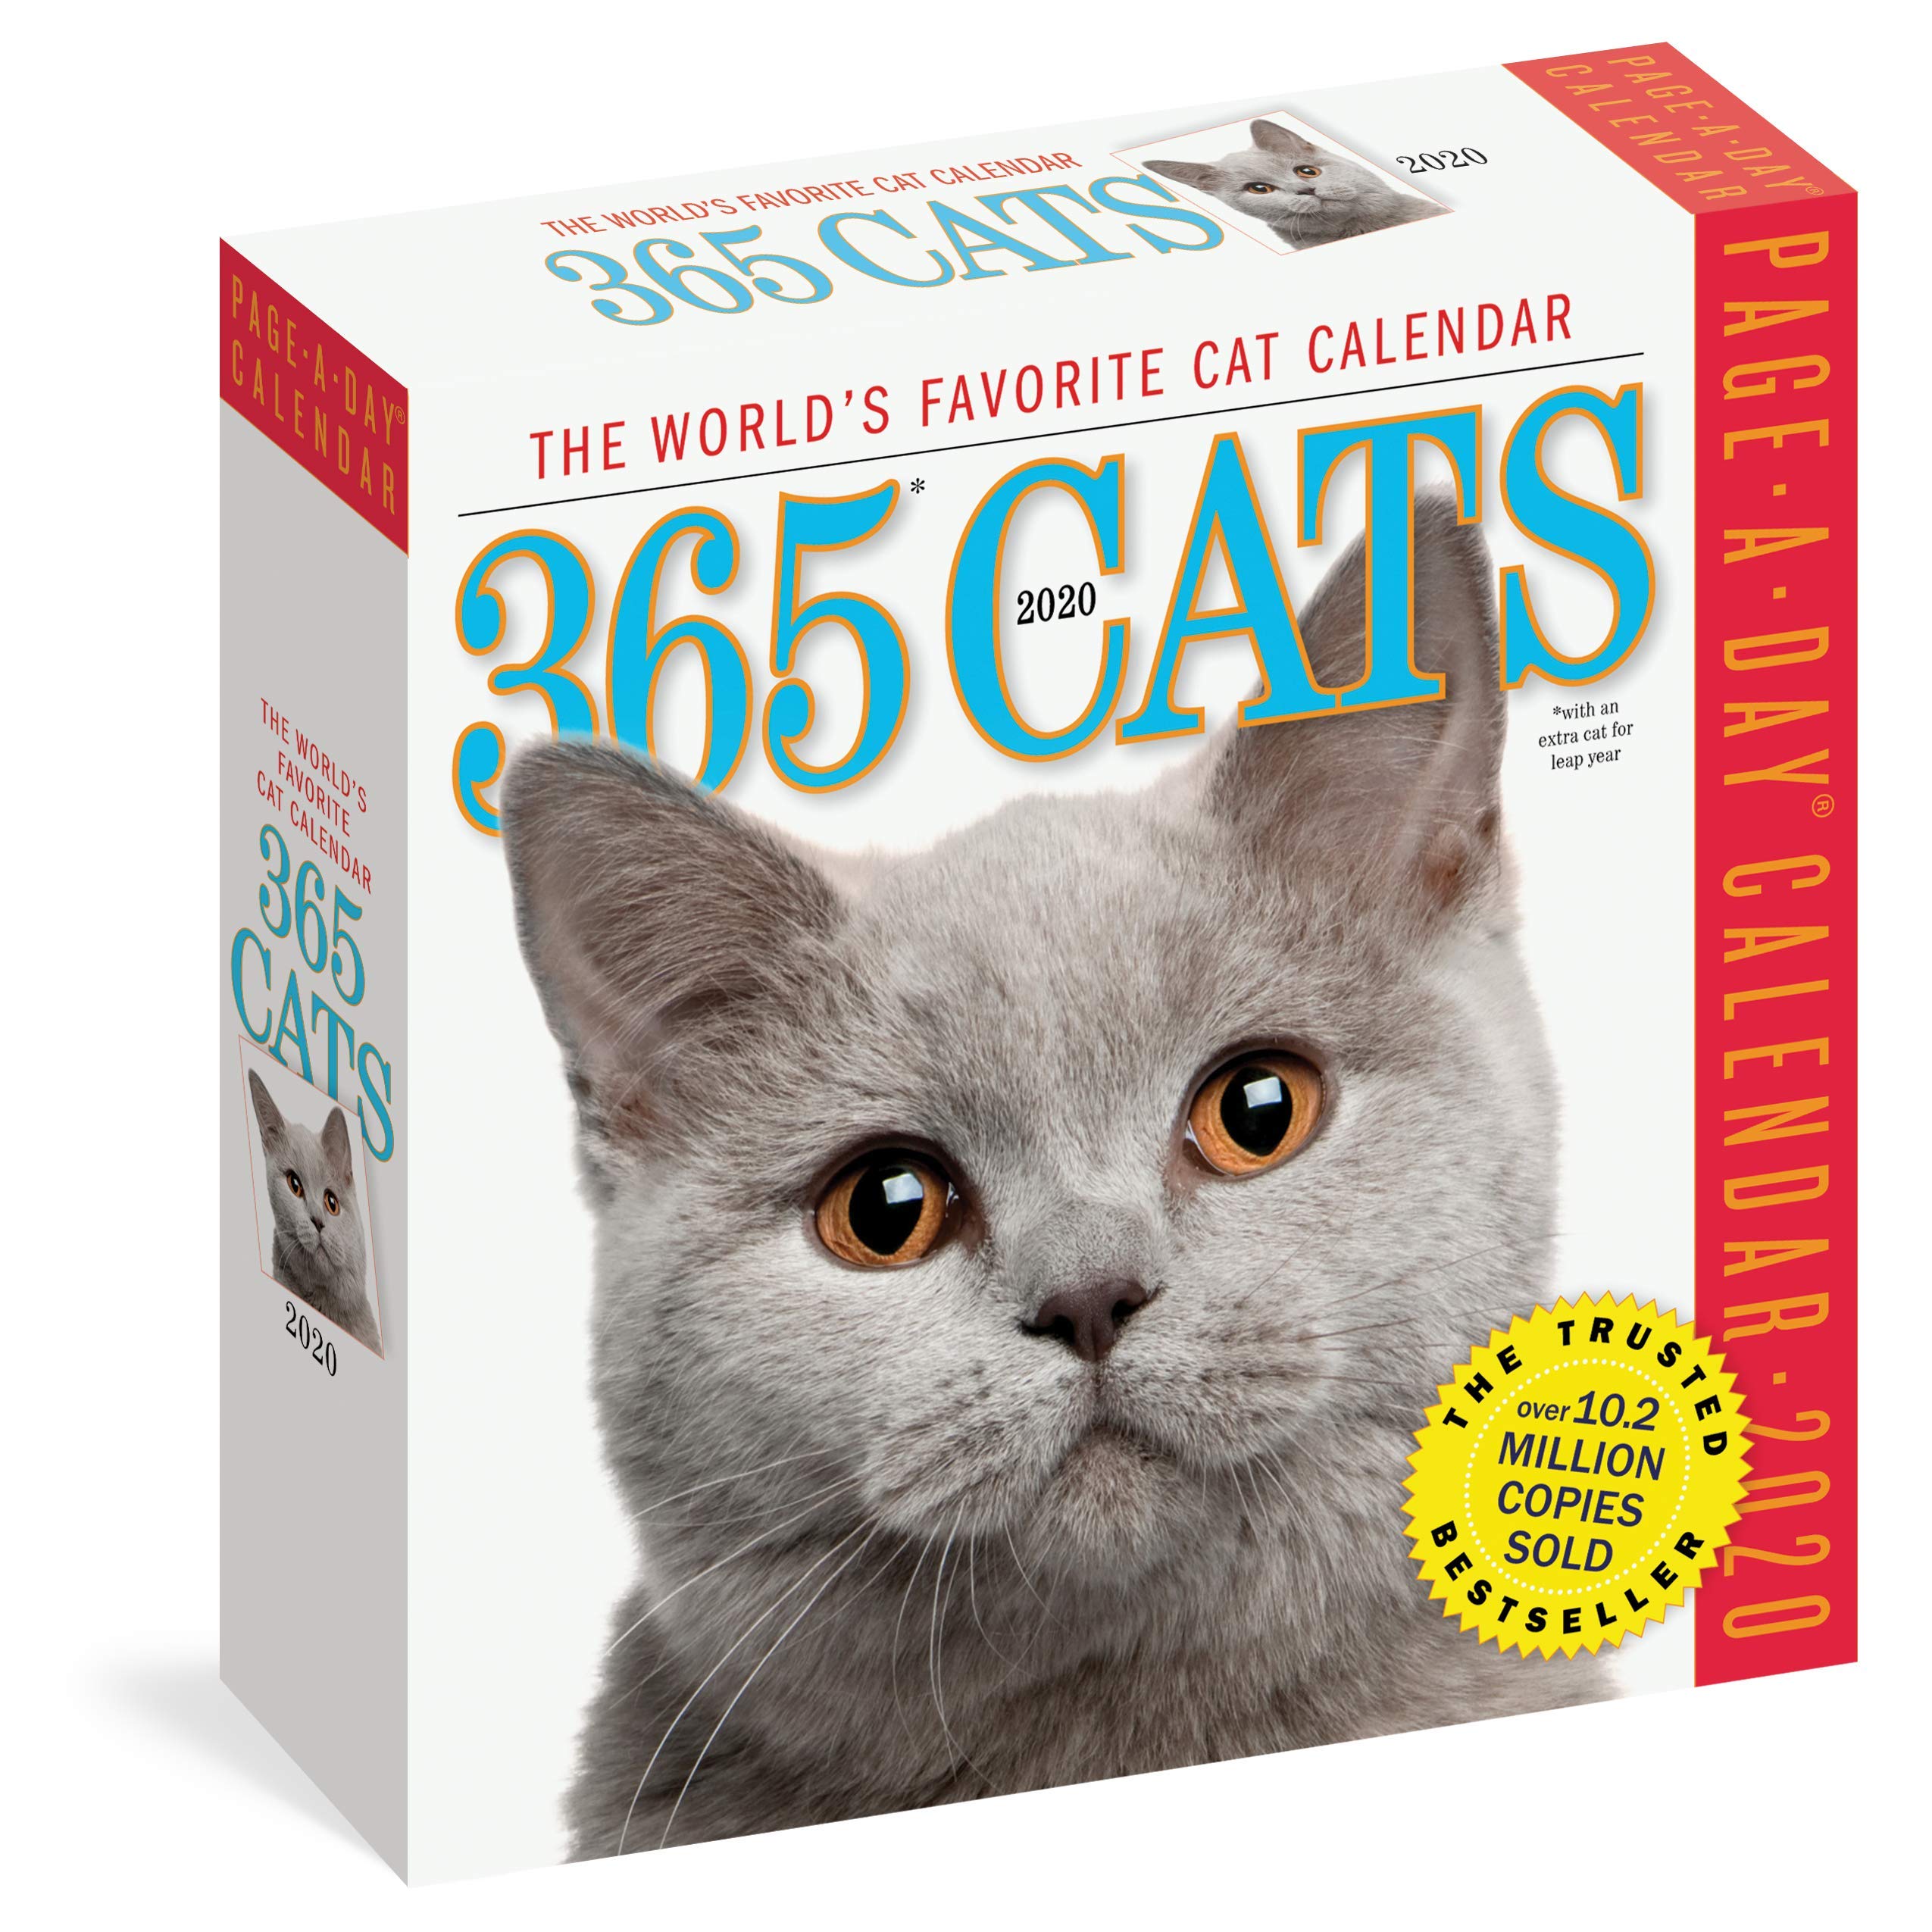 Calendar 2020 - Page-A-Day - 365 Cats | Workman Publishing